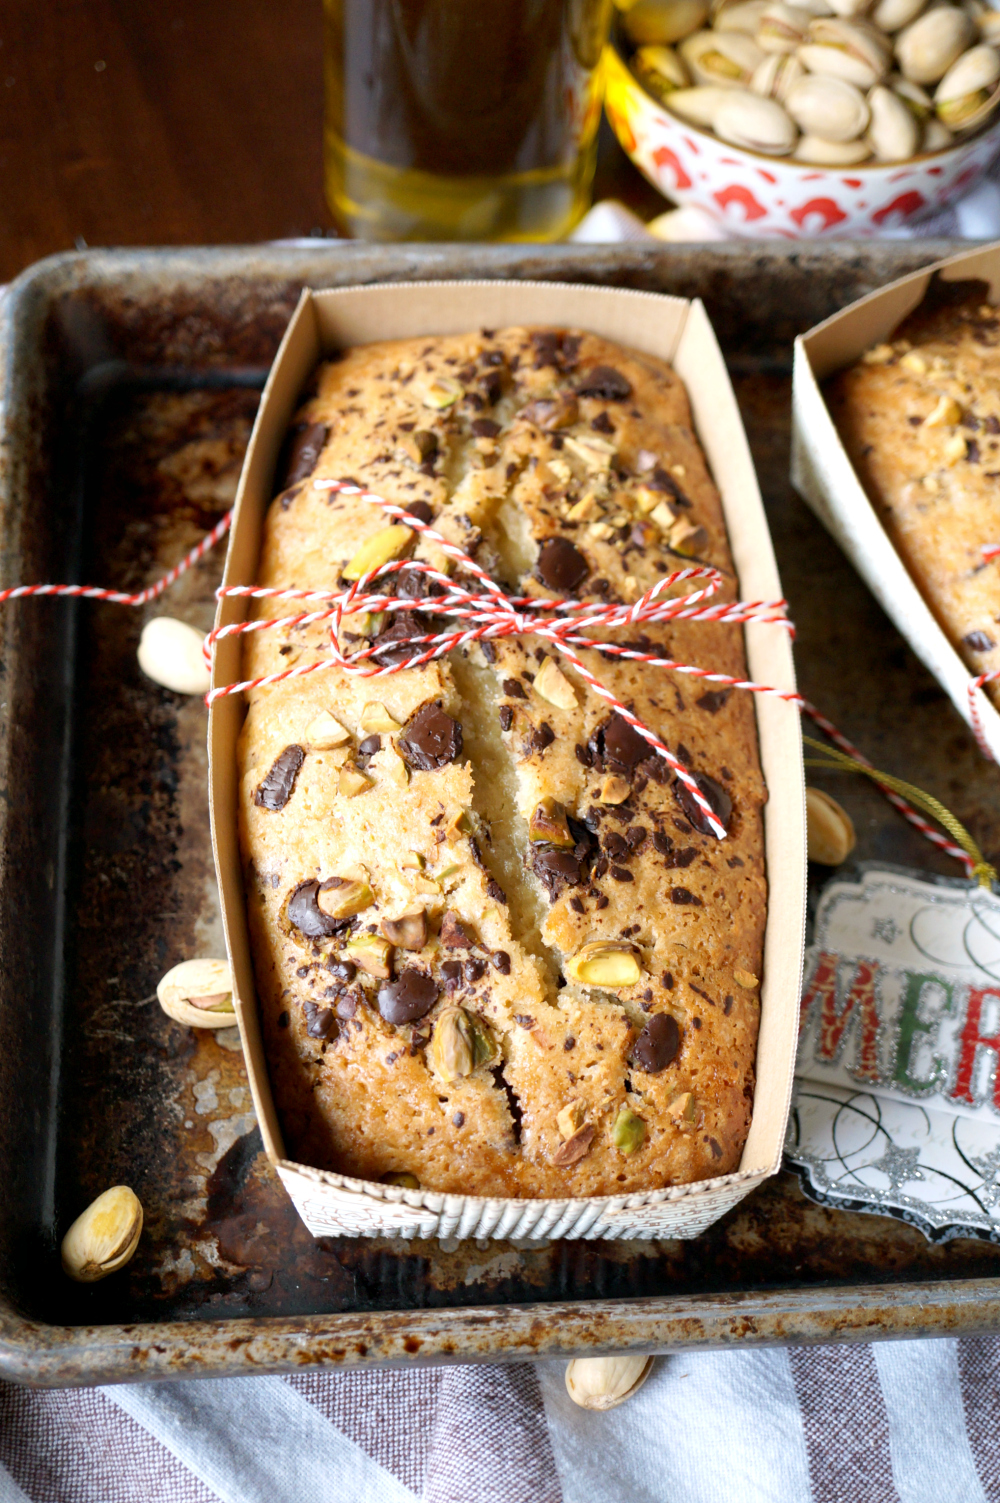 vegan chocolate chunk pistachio olive oil loaf cakes | The Baking Fairy